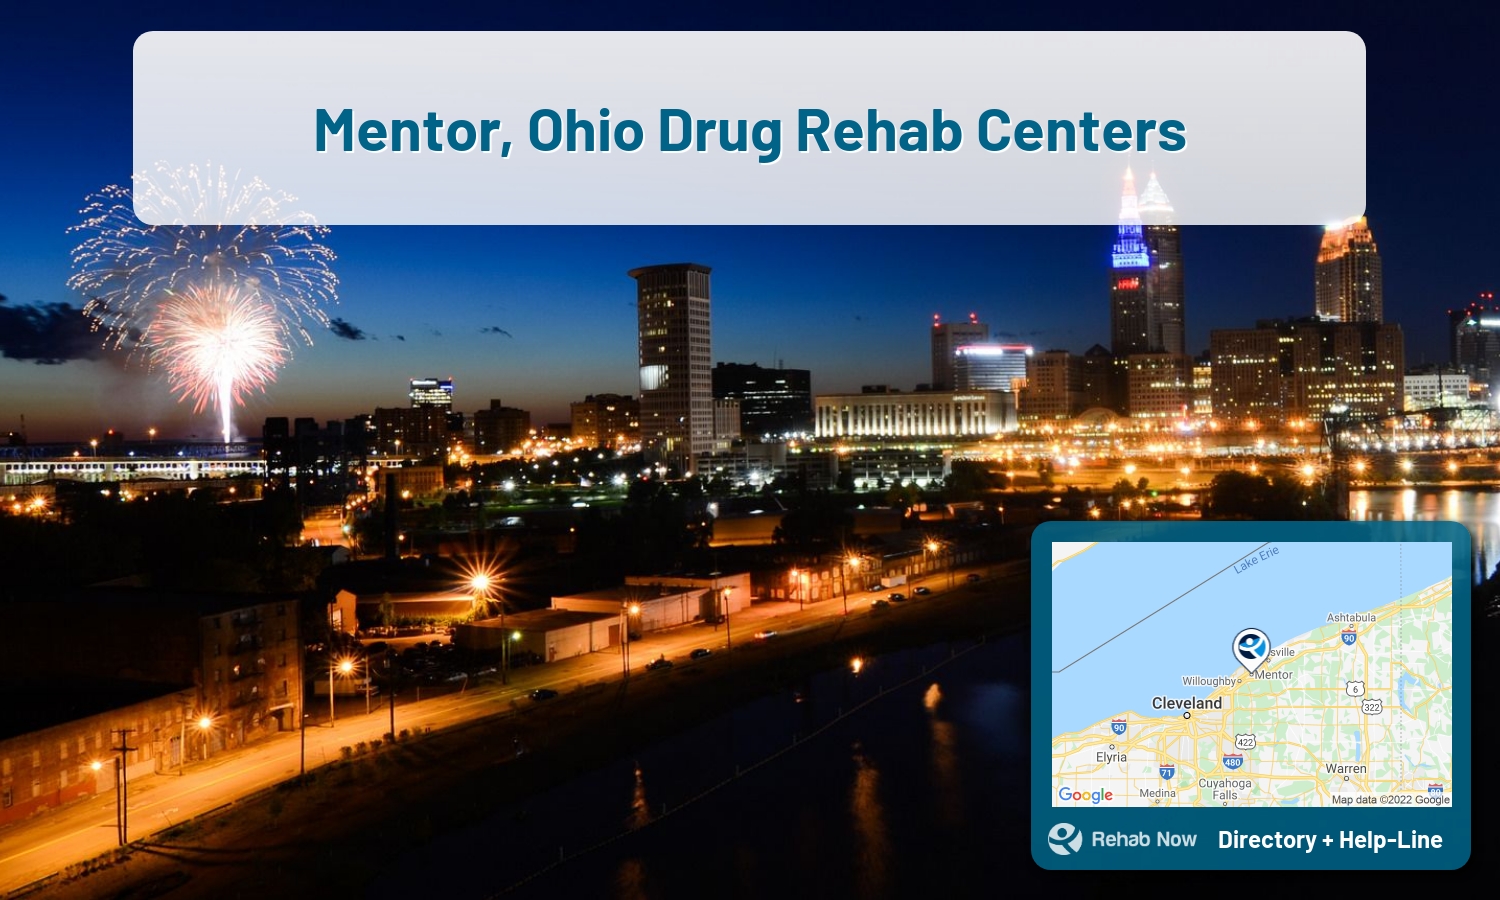 Mentor, OH Treatment Centers. Find drug rehab in Mentor, Ohio, or detox and treatment programs. Get the right help now!